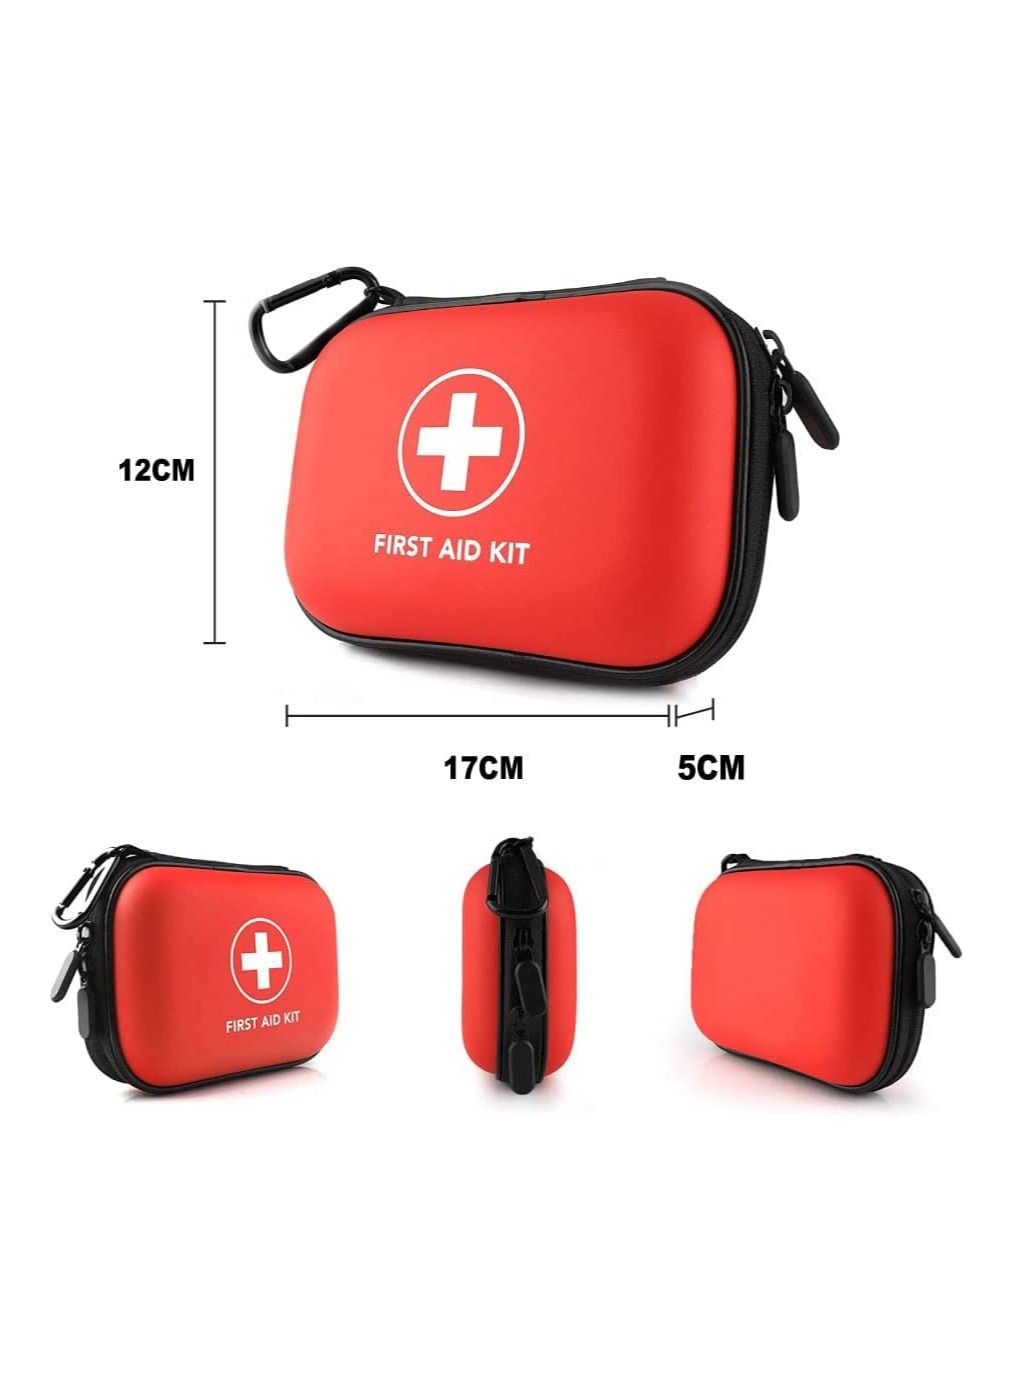 104-Piece First Aid Kit Set For Minor Cuts, Scrapes, Sprains & Burns, Ideal for Home, Car, Travel and Outdoor Emergencies Medical Kit 